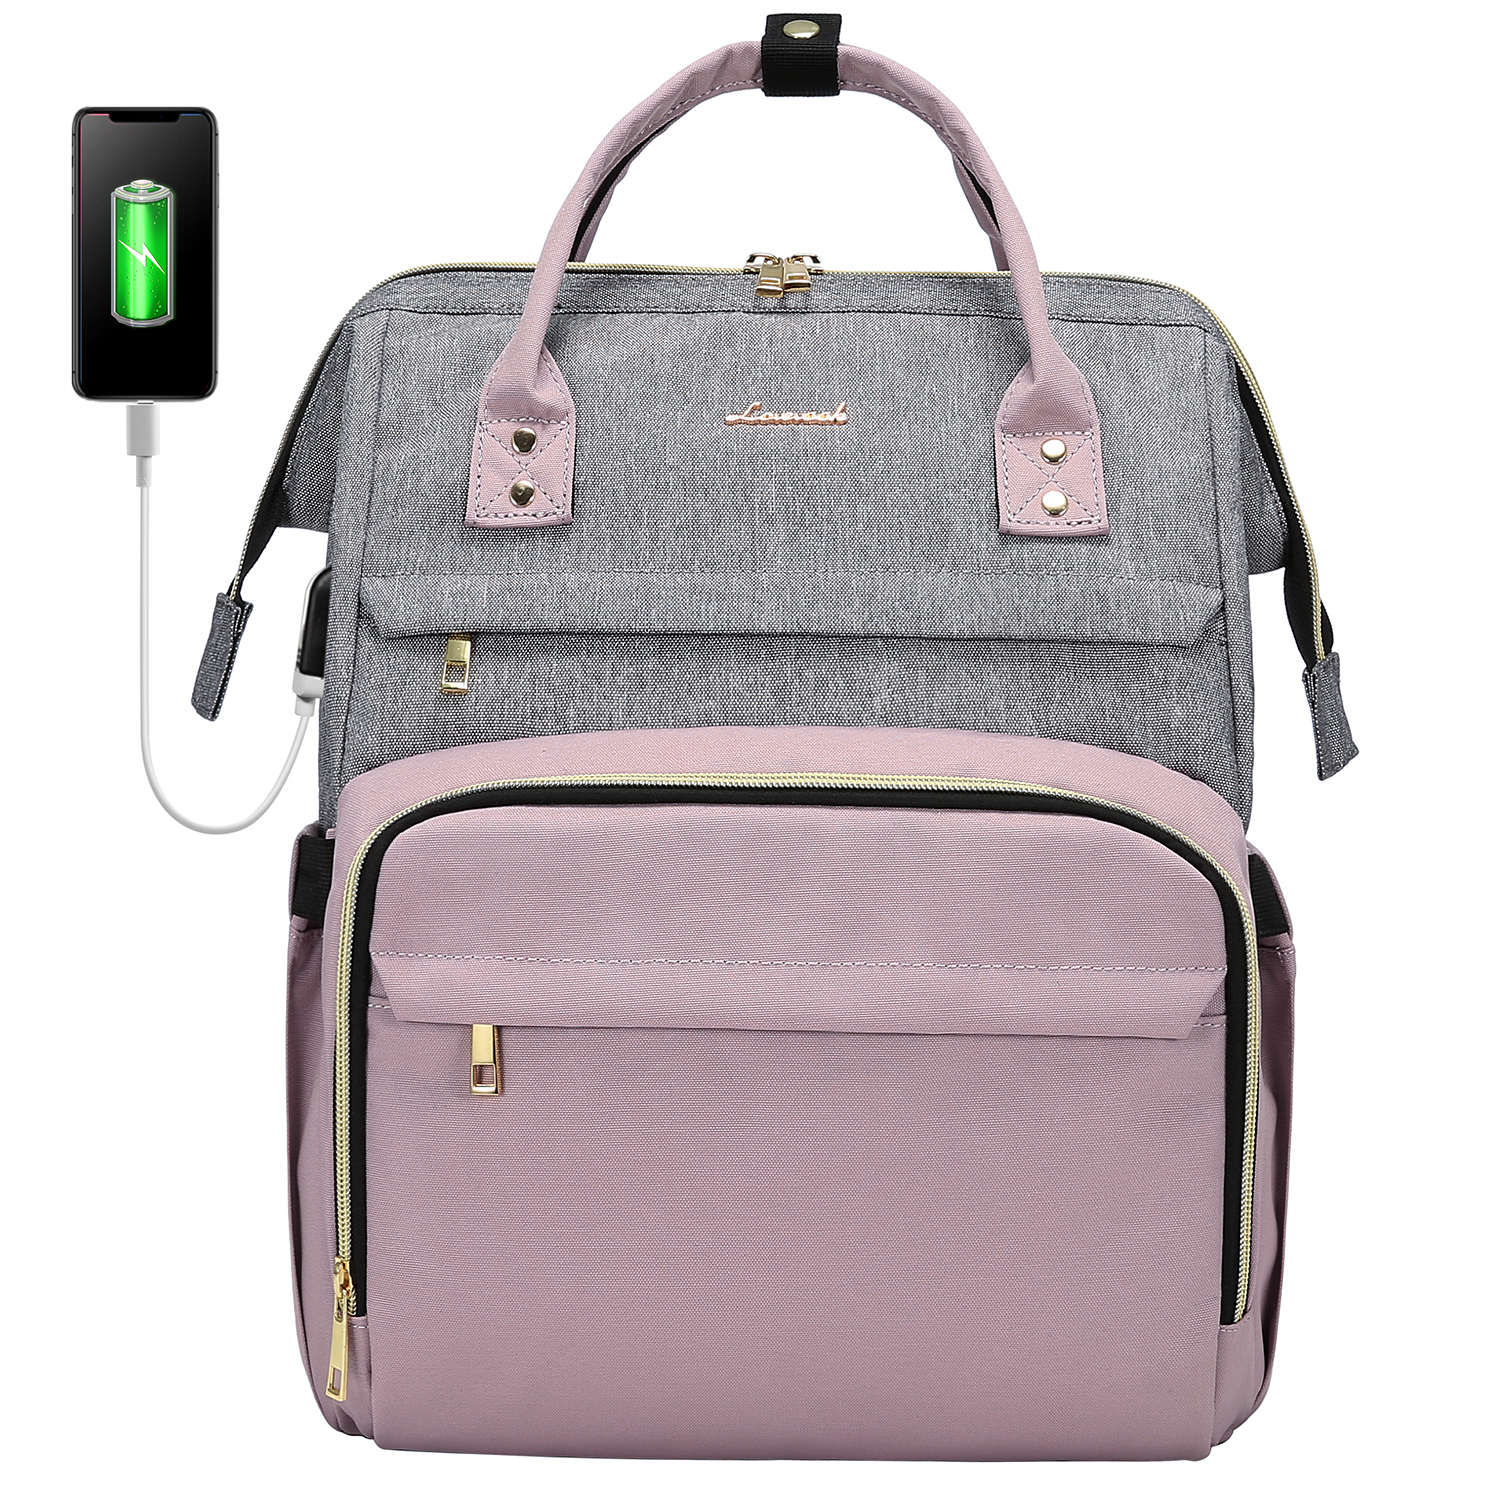 LOVEVOOK Laptop Backpack, Contrasting Colors Design, Fits 15.6/17Inch ...